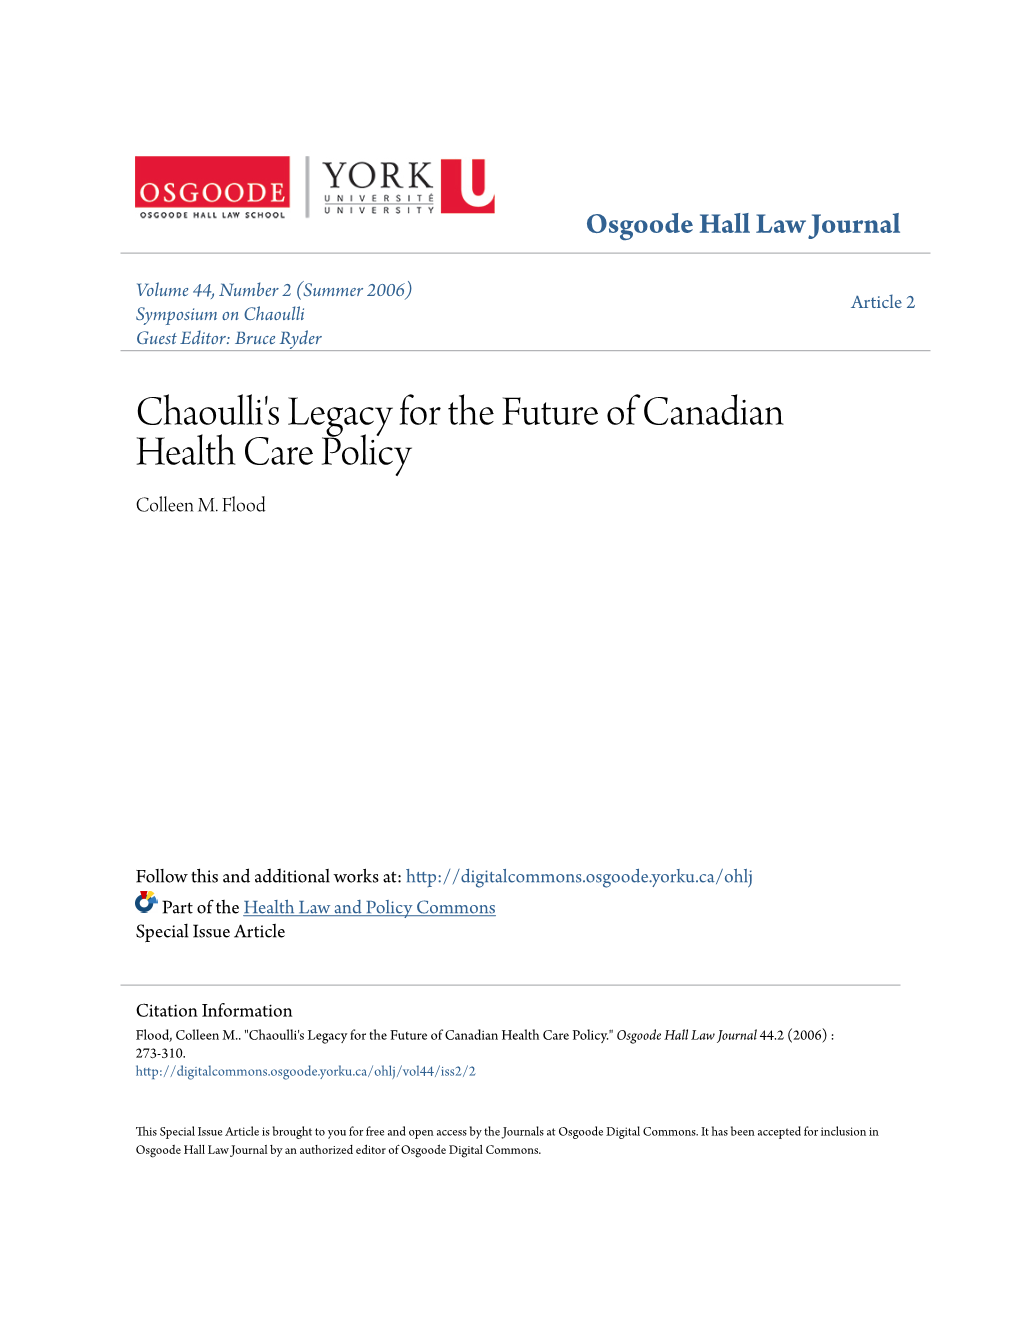 Chaoulli's Legacy for the Future of Canadian Health Care Policy Colleen M